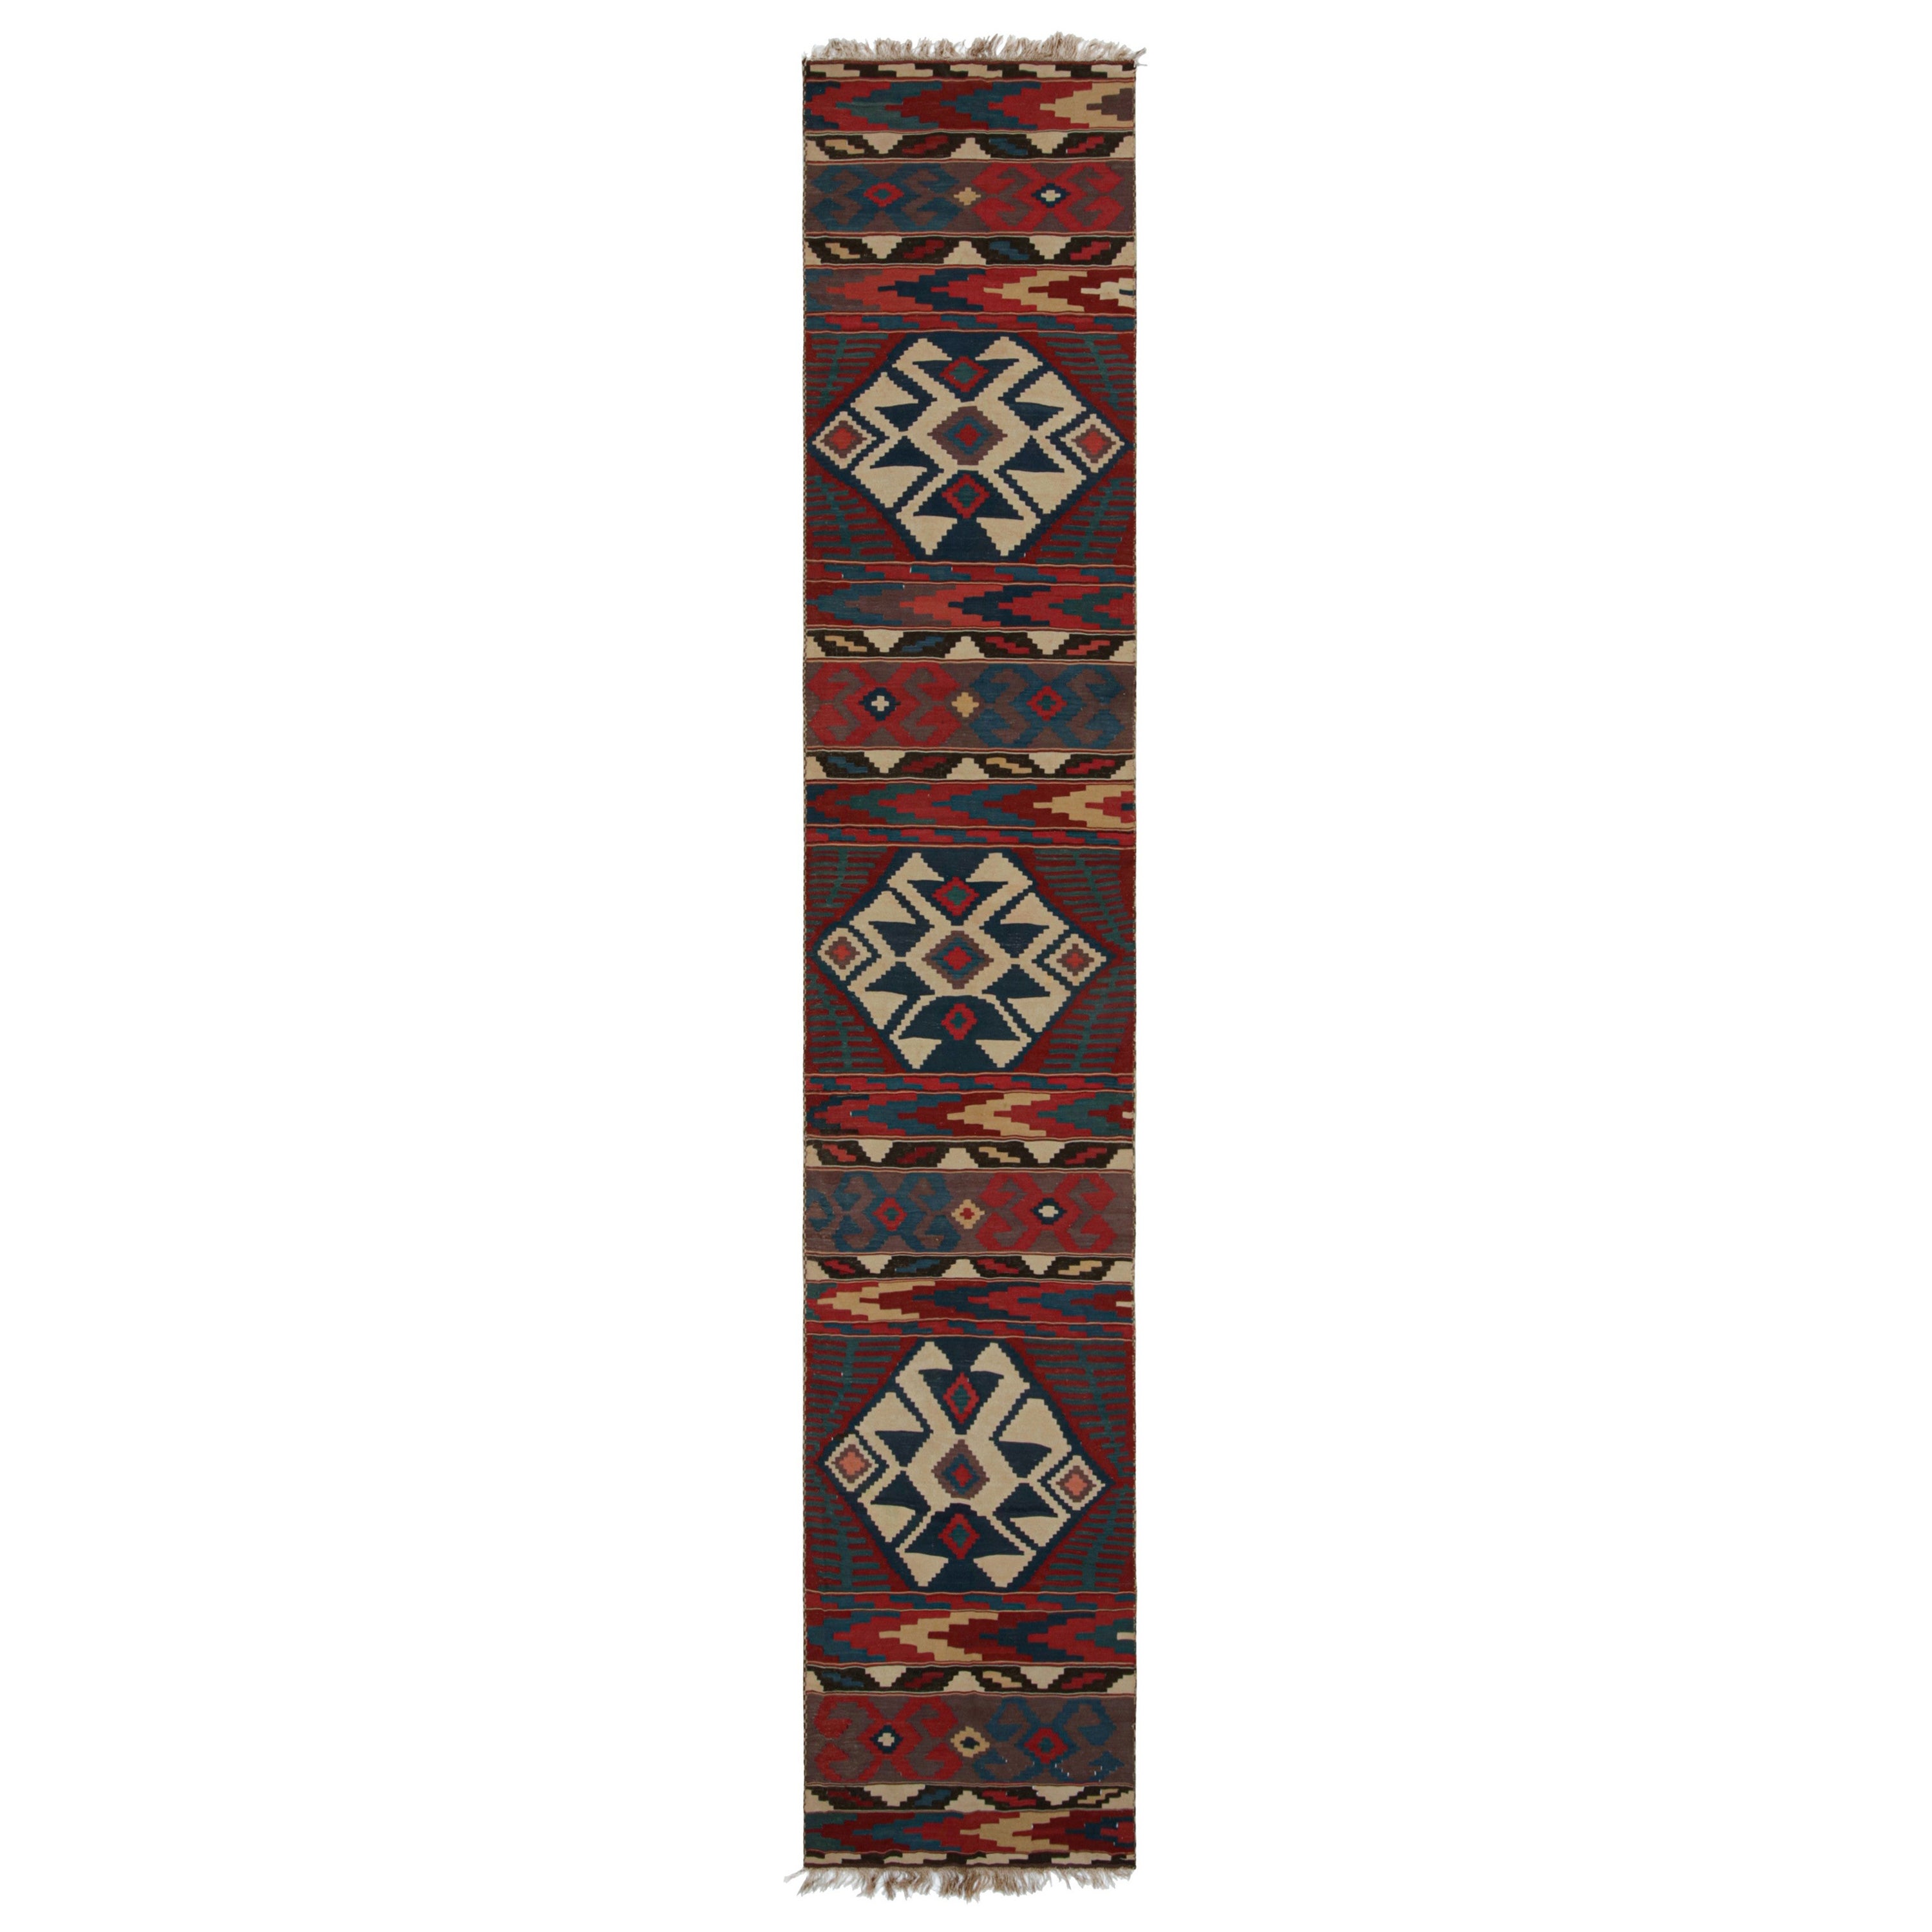 Twin Vintage Persian Kilim Runner Rugs with Geometric Patterns, from Rug & Kilim